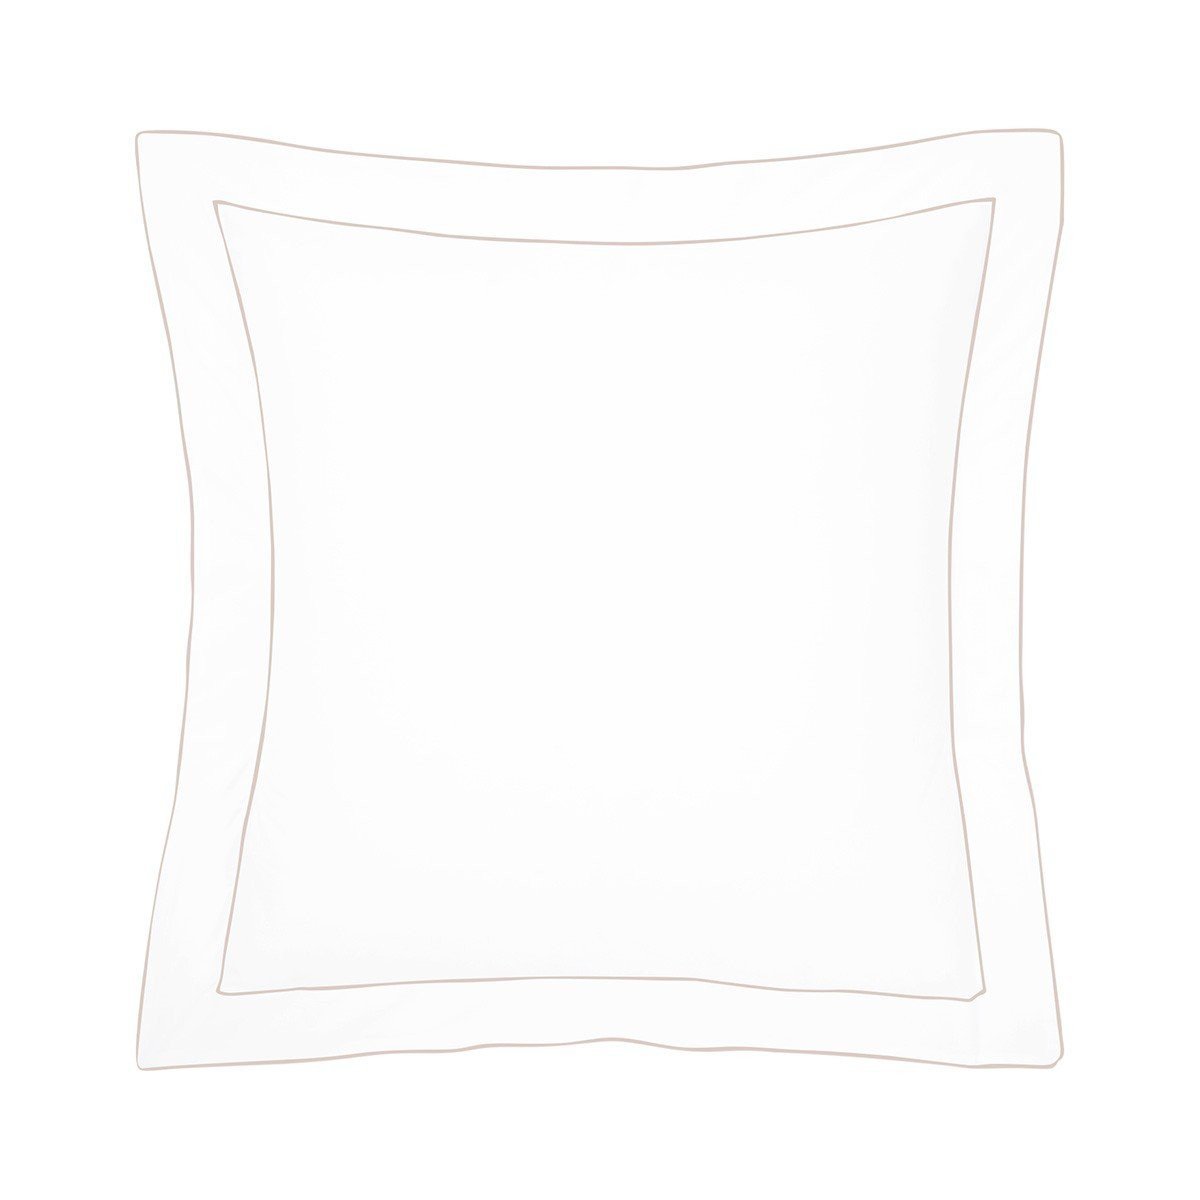 Flandre Pierre Bedding by Yves Delorme - Fig Linens - White, Cotton, euro sham